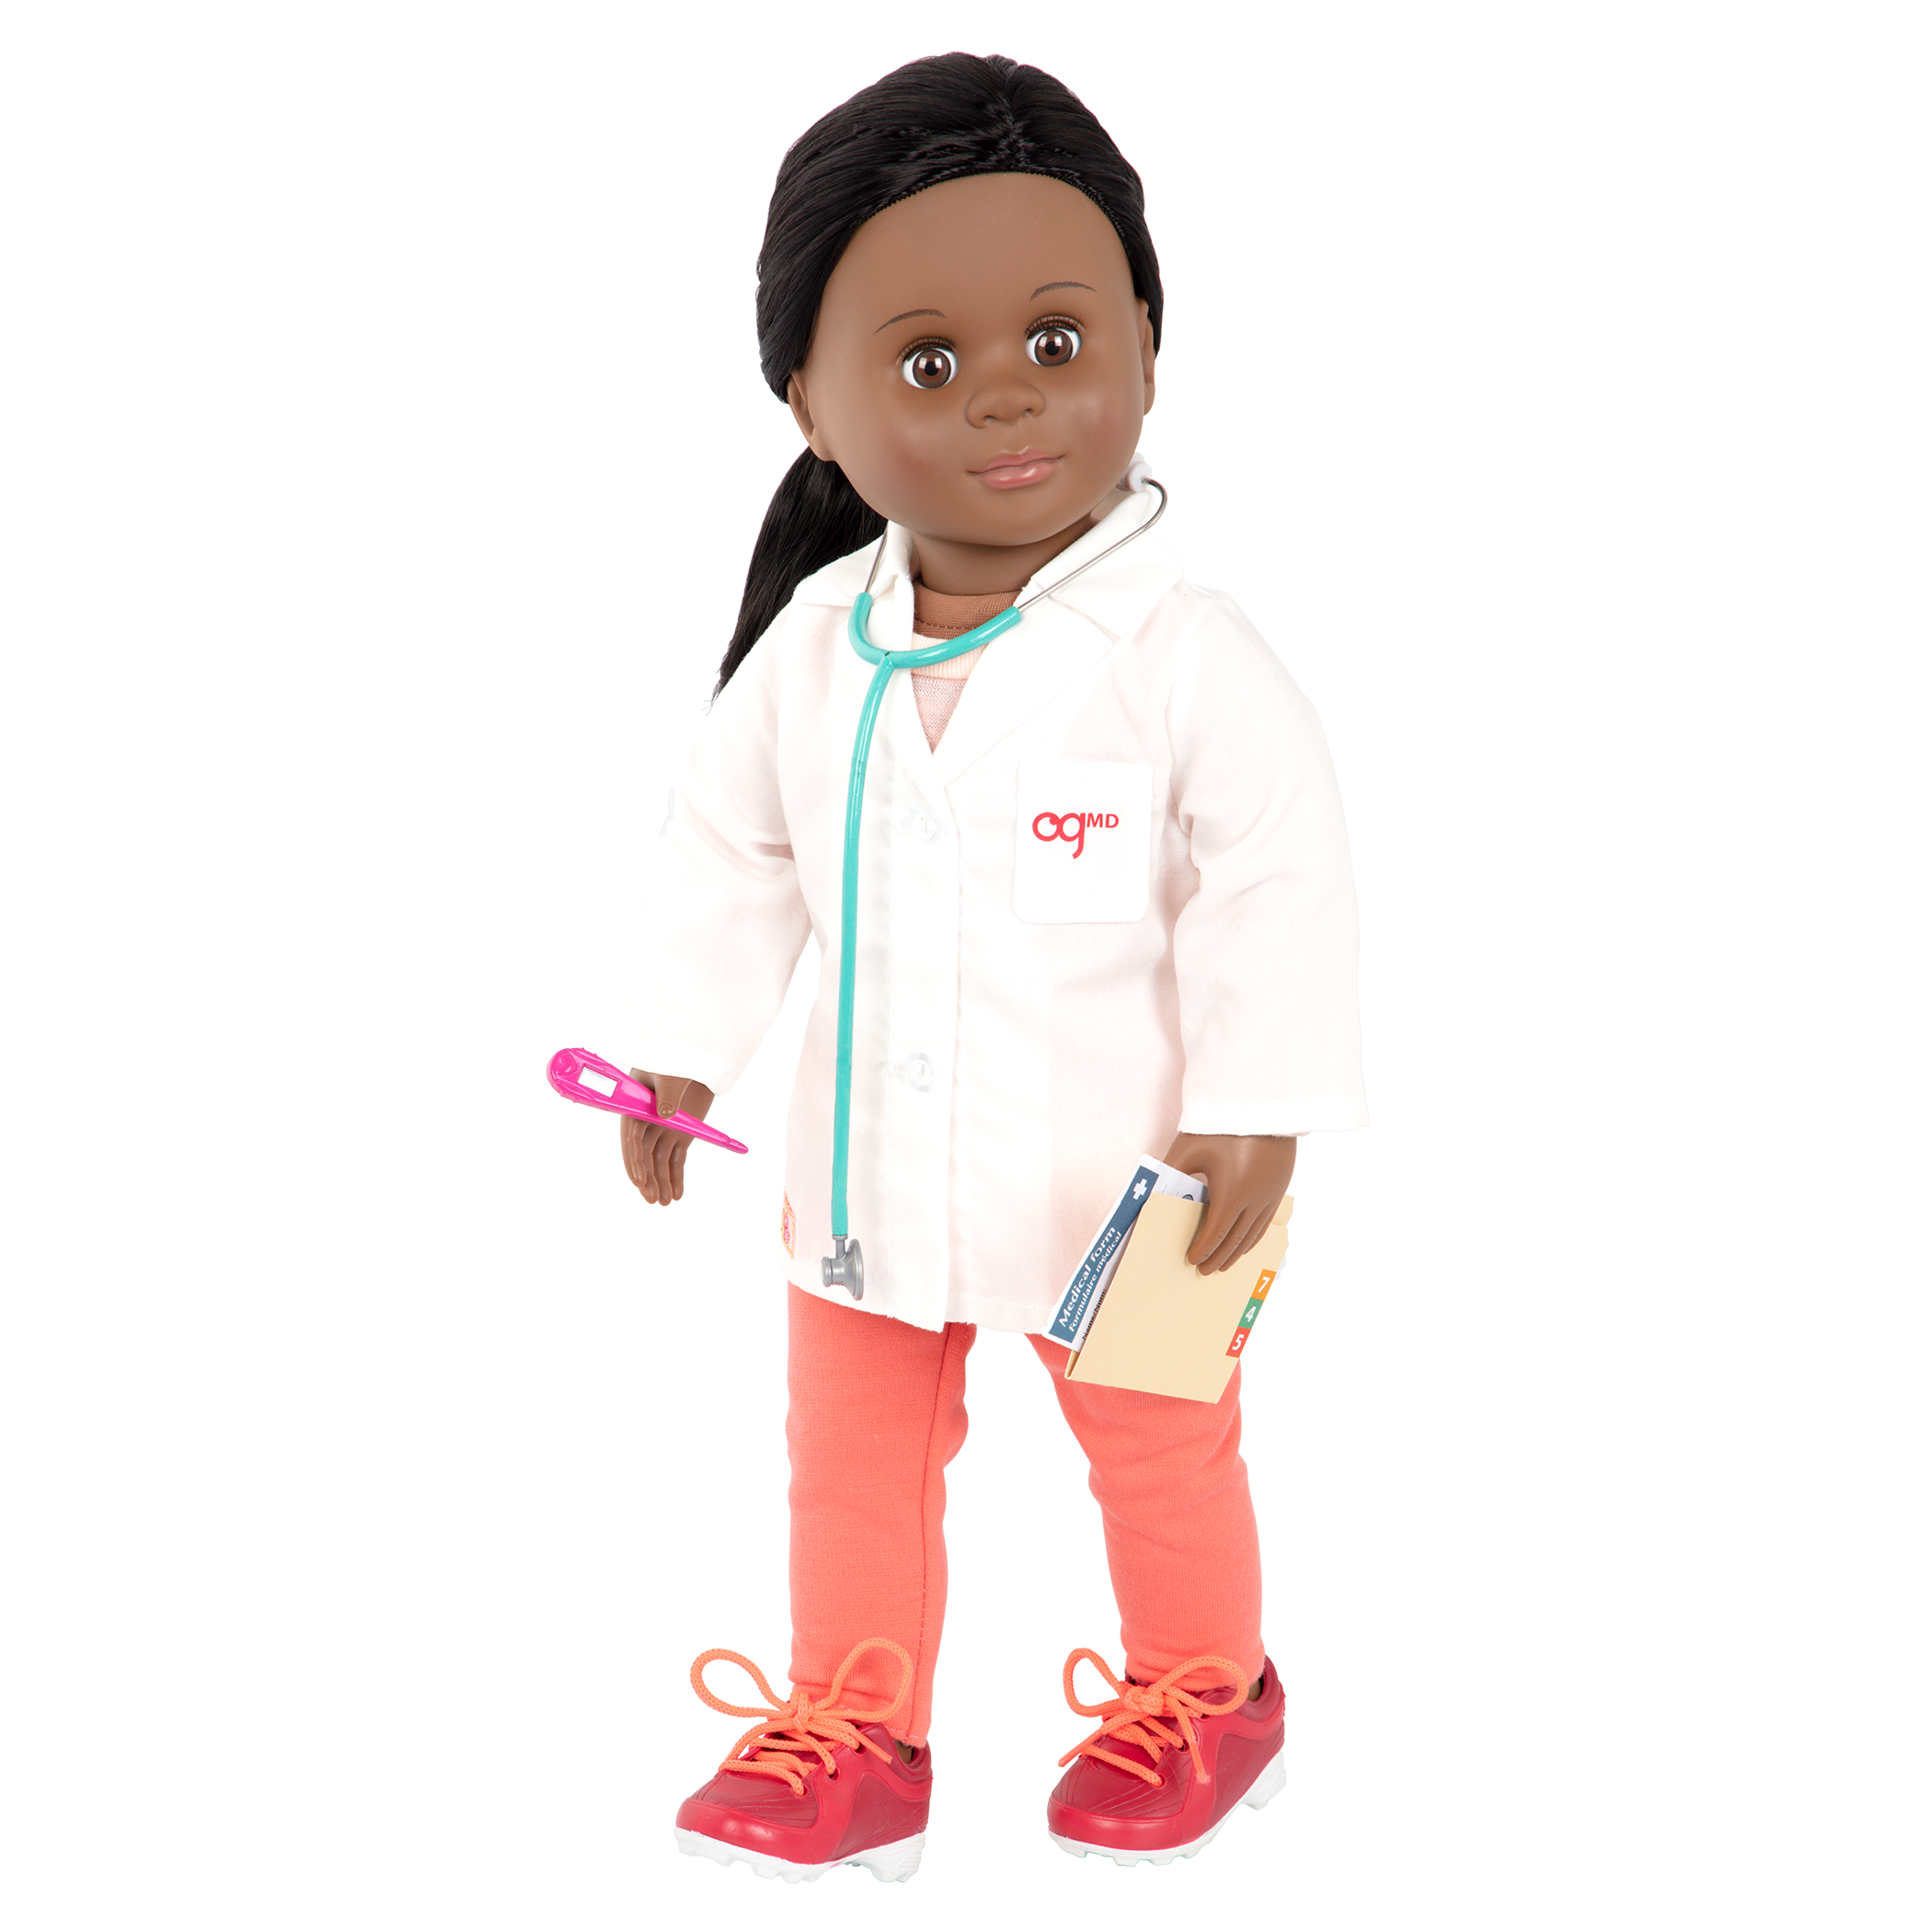 18-inch doll using doctor playset